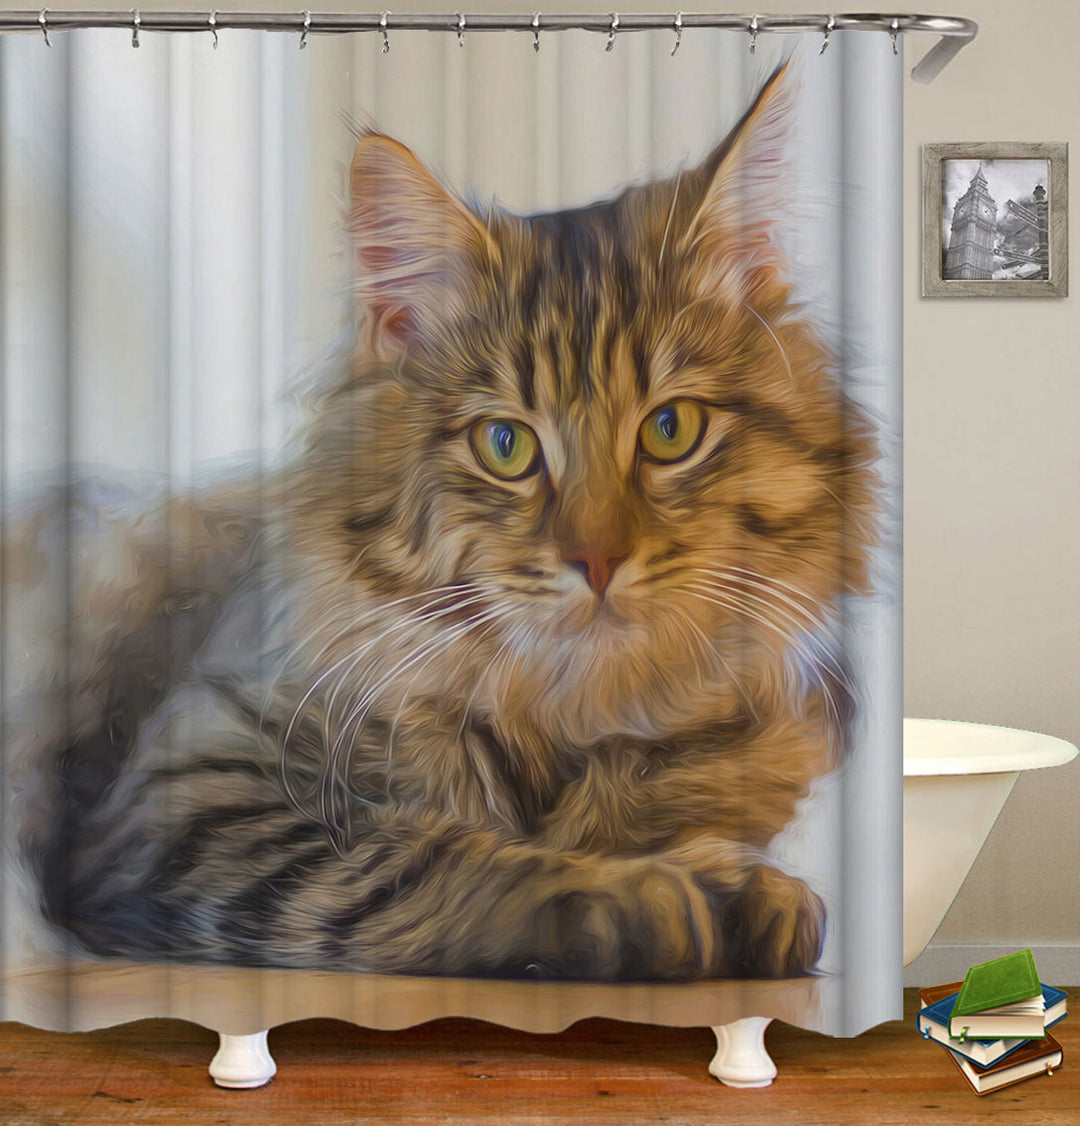 Artistic Shower Curtains with Beautiful Cat